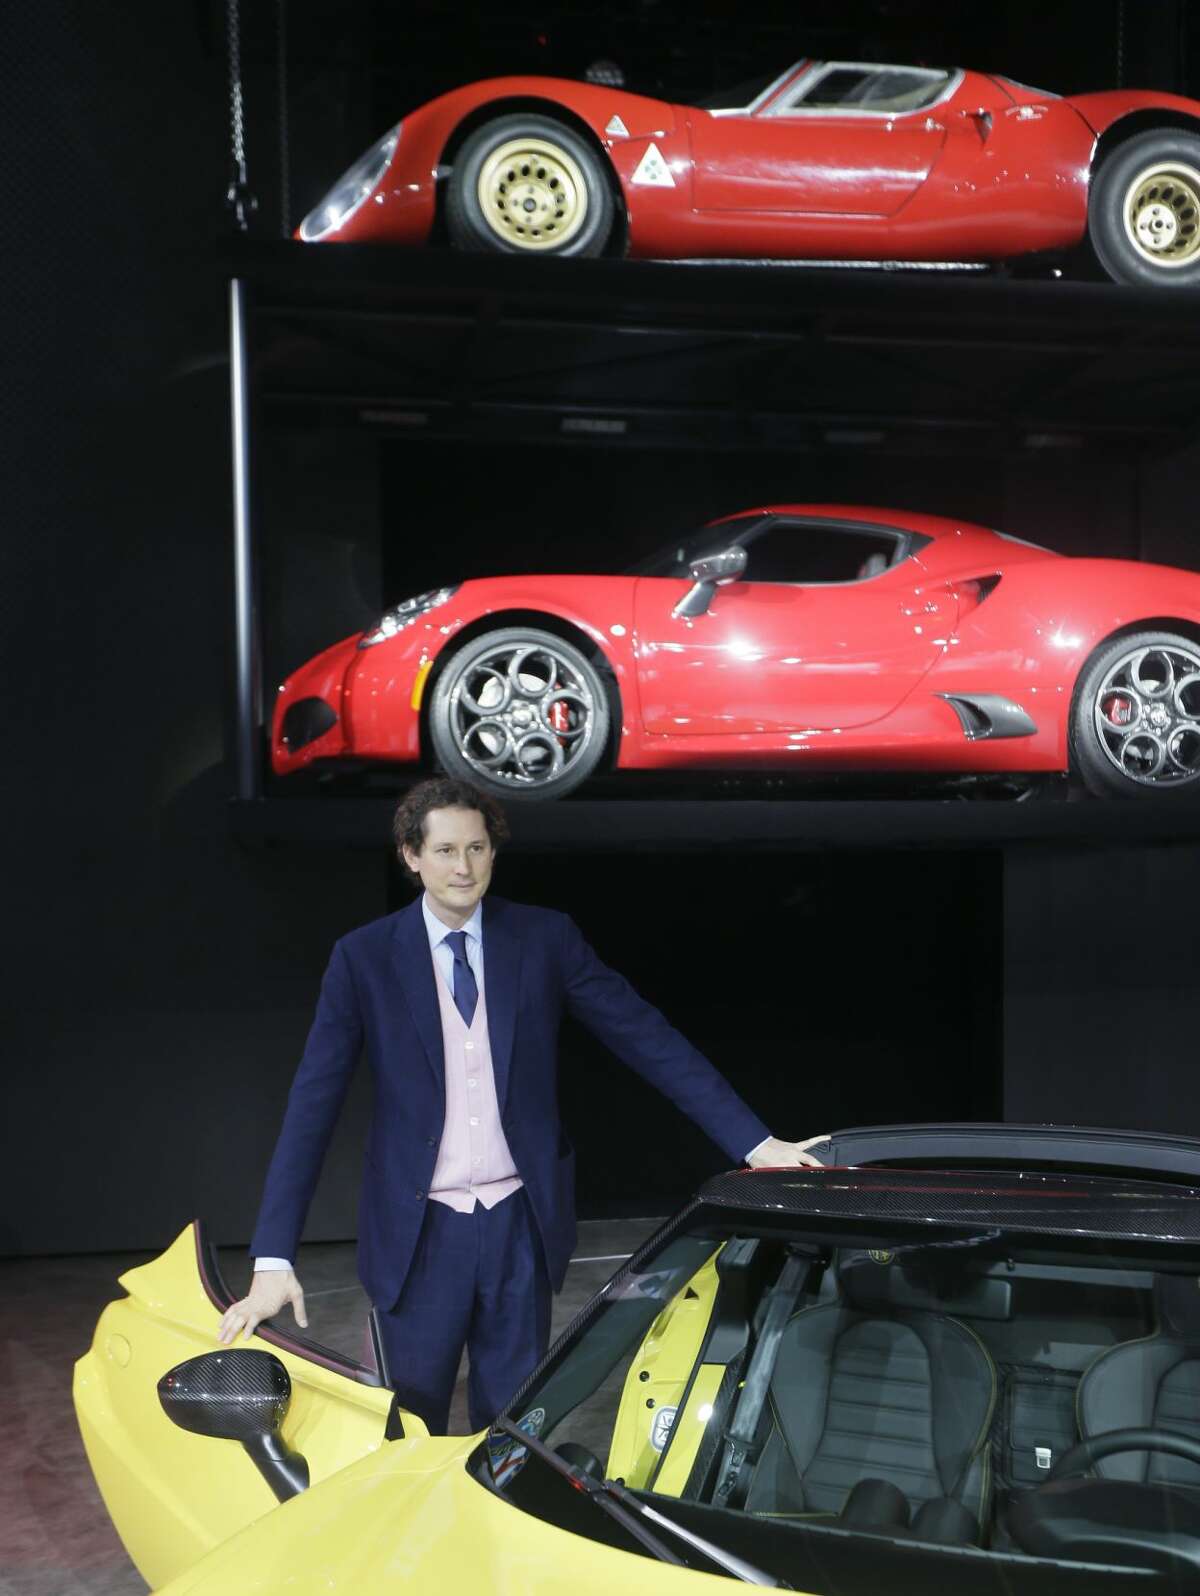 Chairman of Fiat Chrysler Automobiles John Elkann stands by the Alfa Romeo 4C Spider during the North American International Auto Show, Monday, Jan. 12, 2015 in Detroit. (AP Photo/Carlos Osorio)